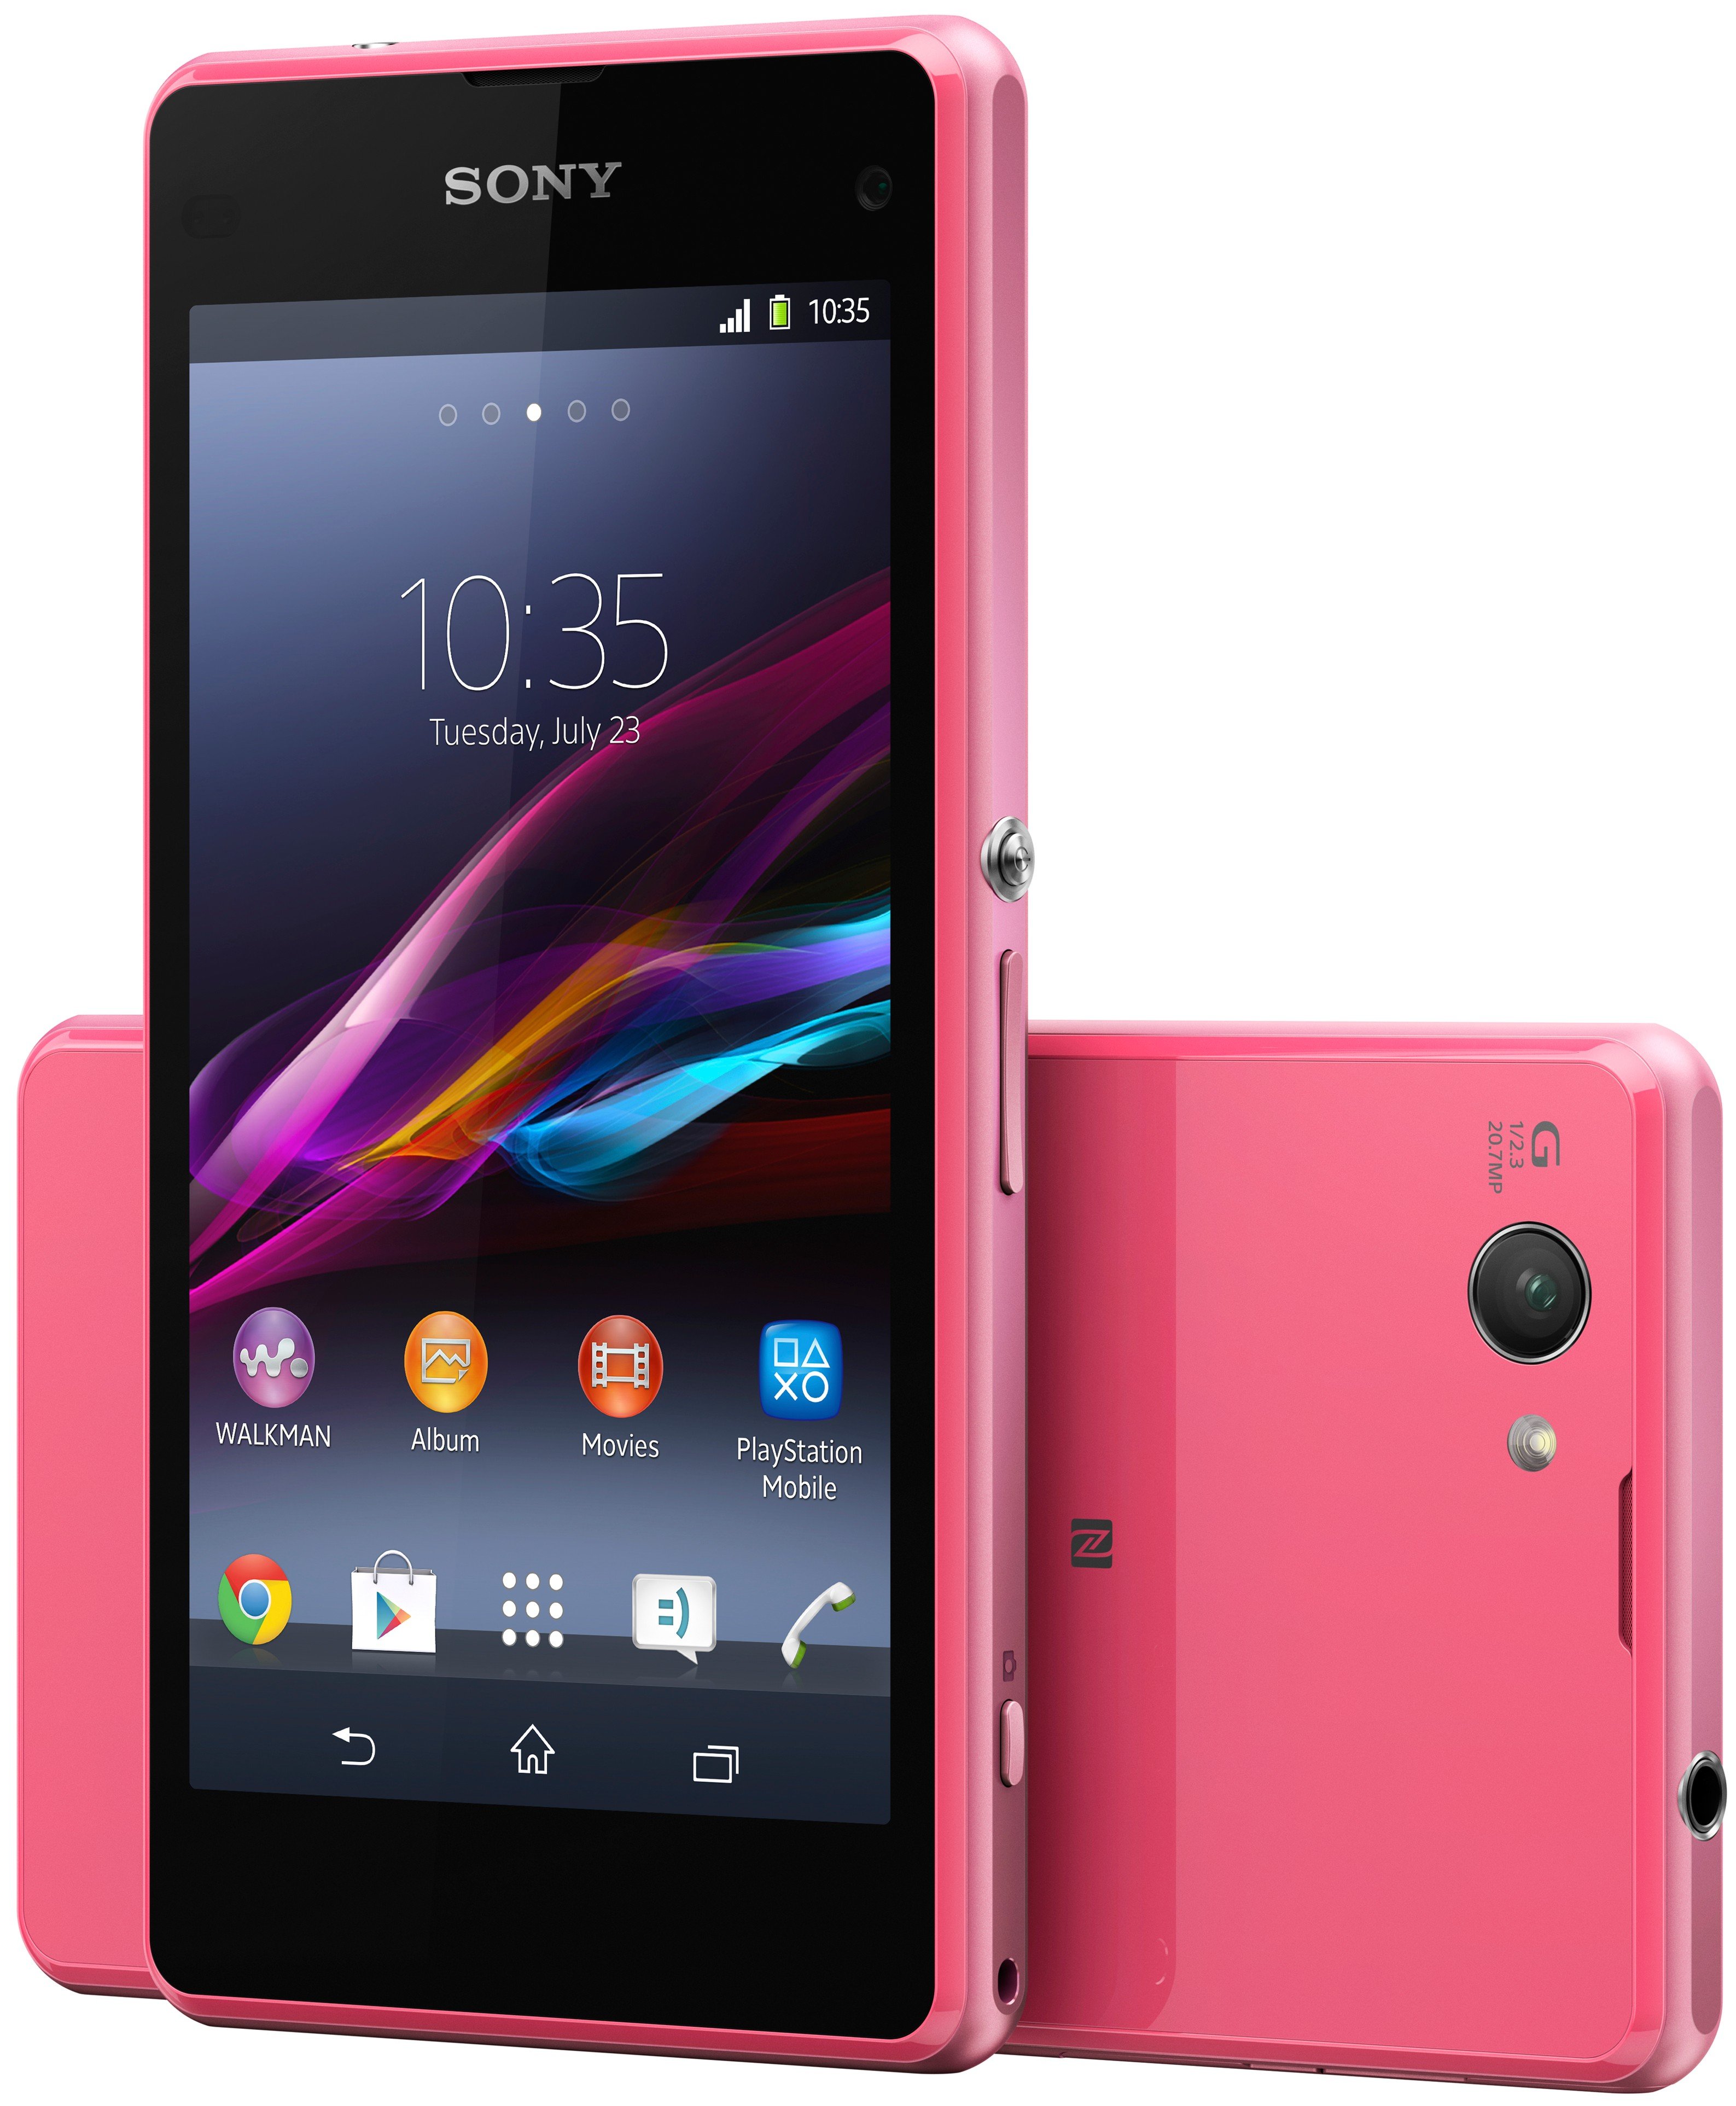 Sony Xperia Z1 specs, review, date PhonesData